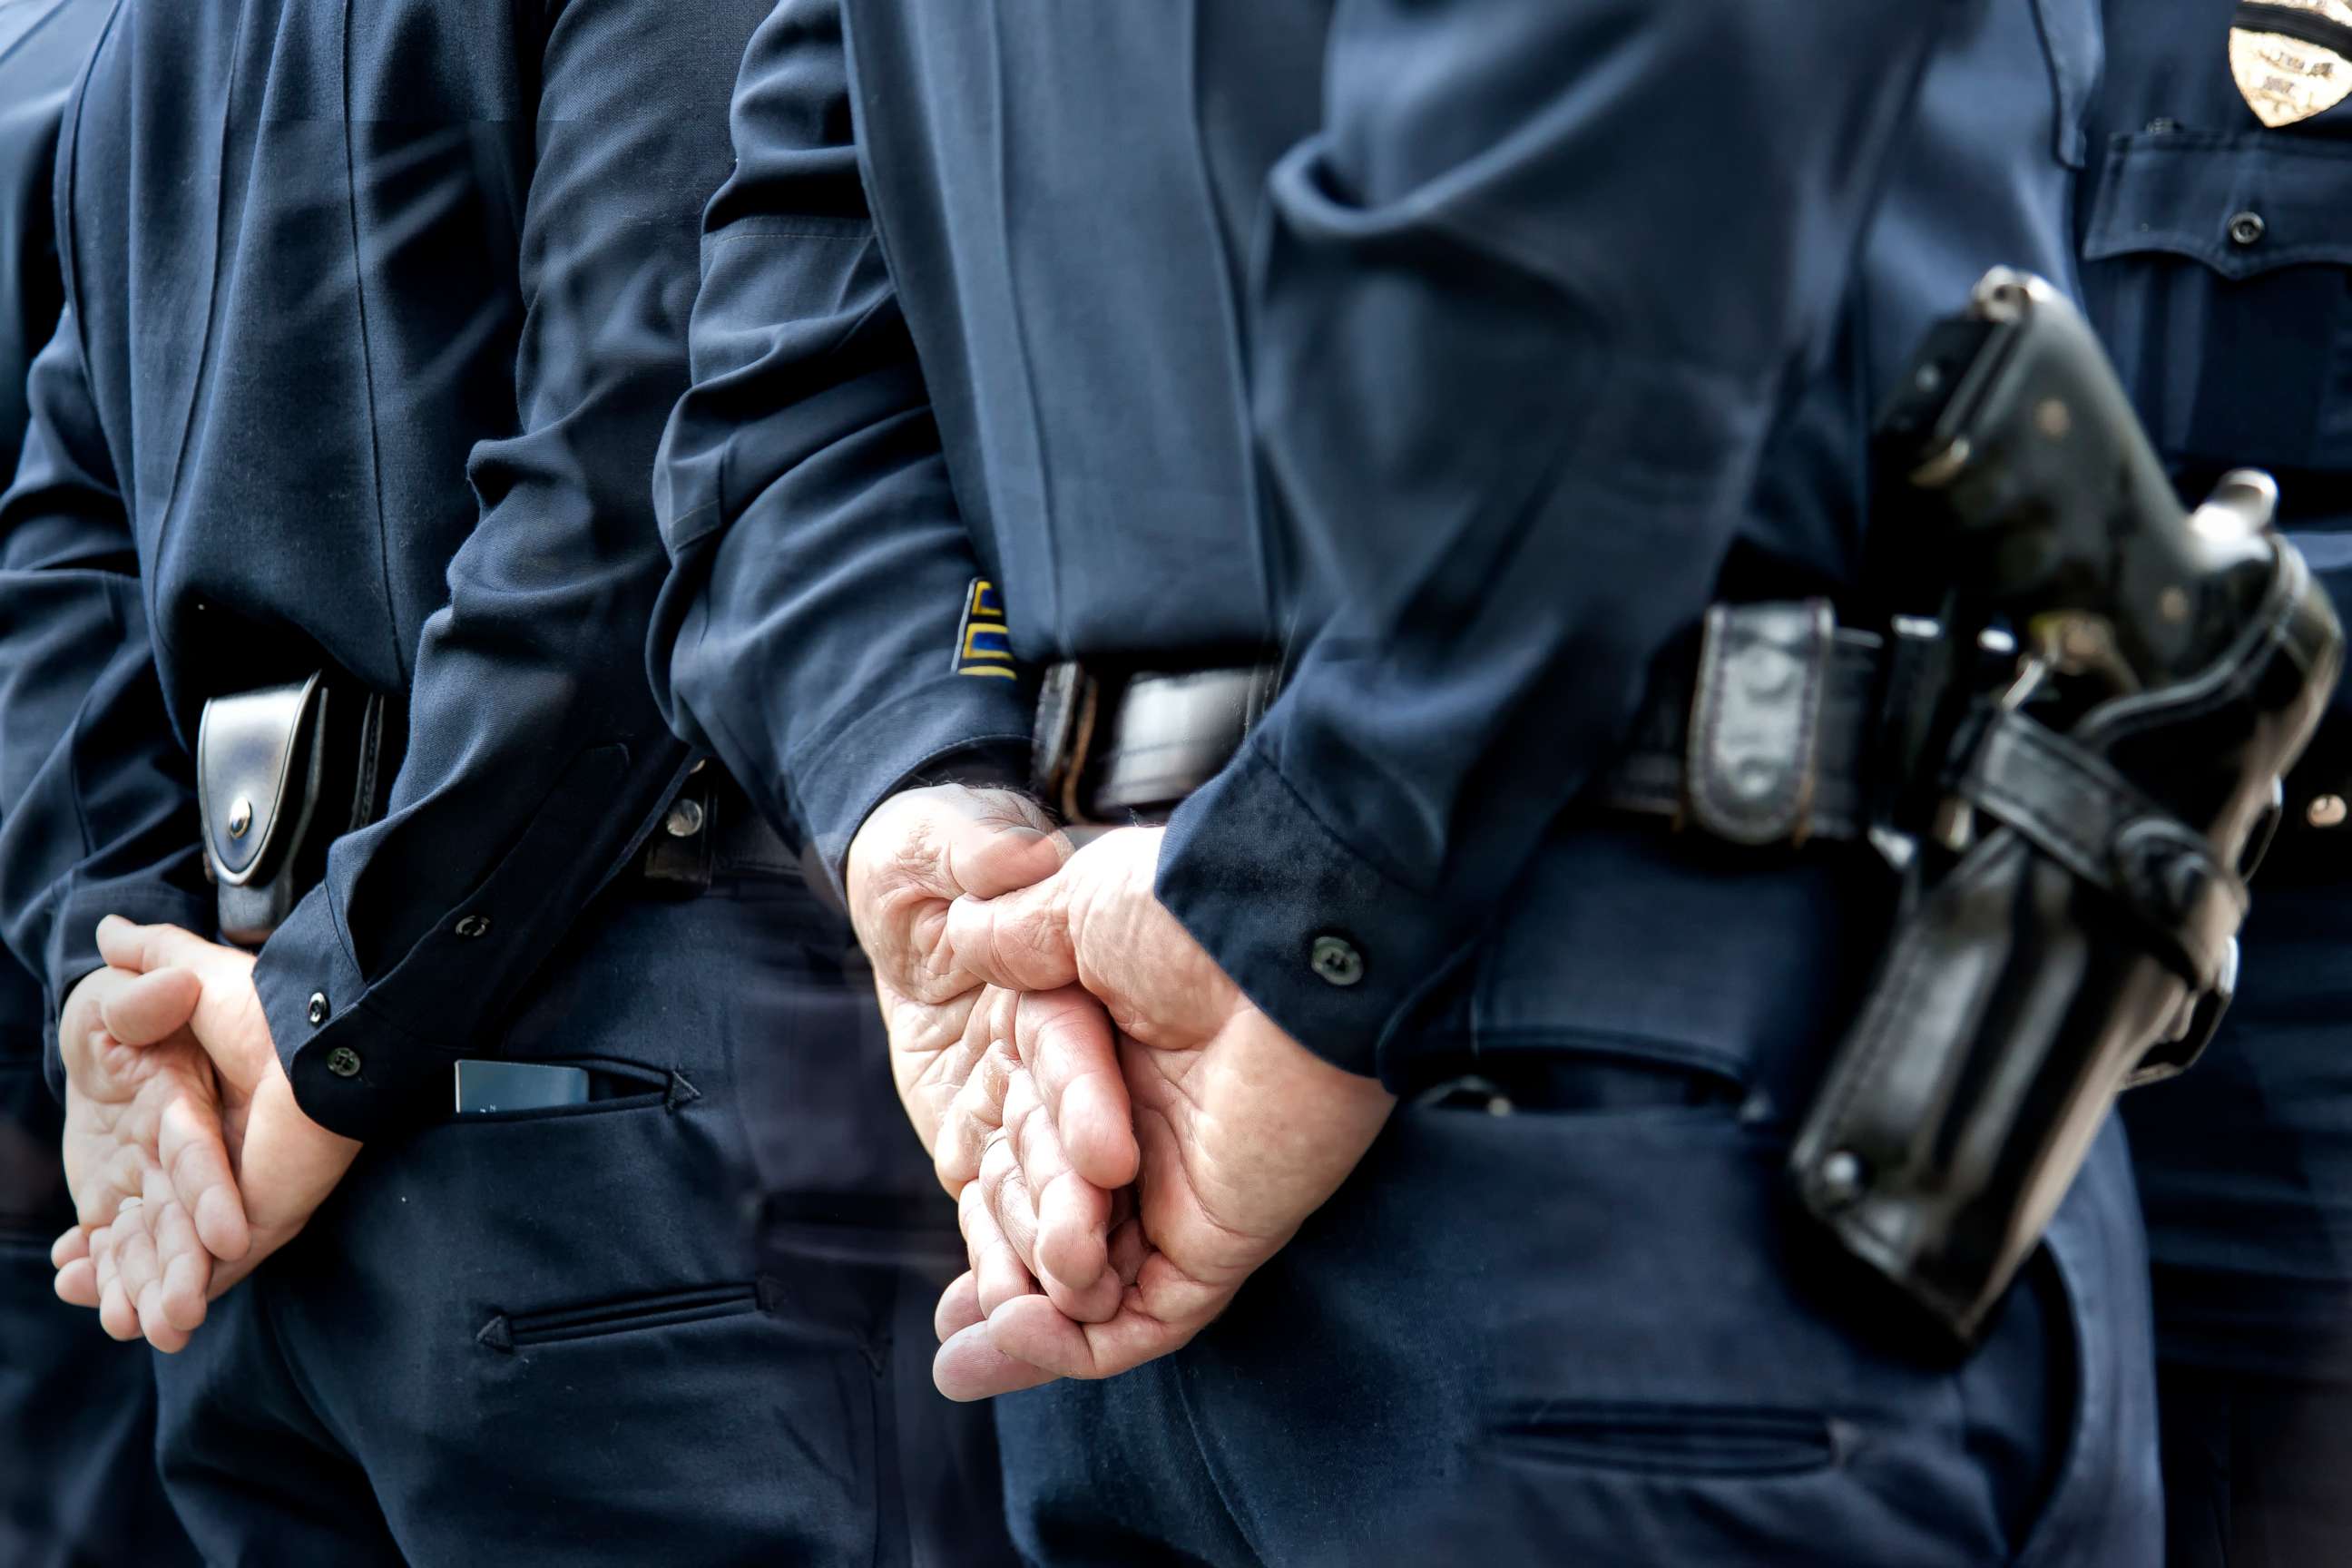 PHOTO: Officers stand attention in this stock photo.